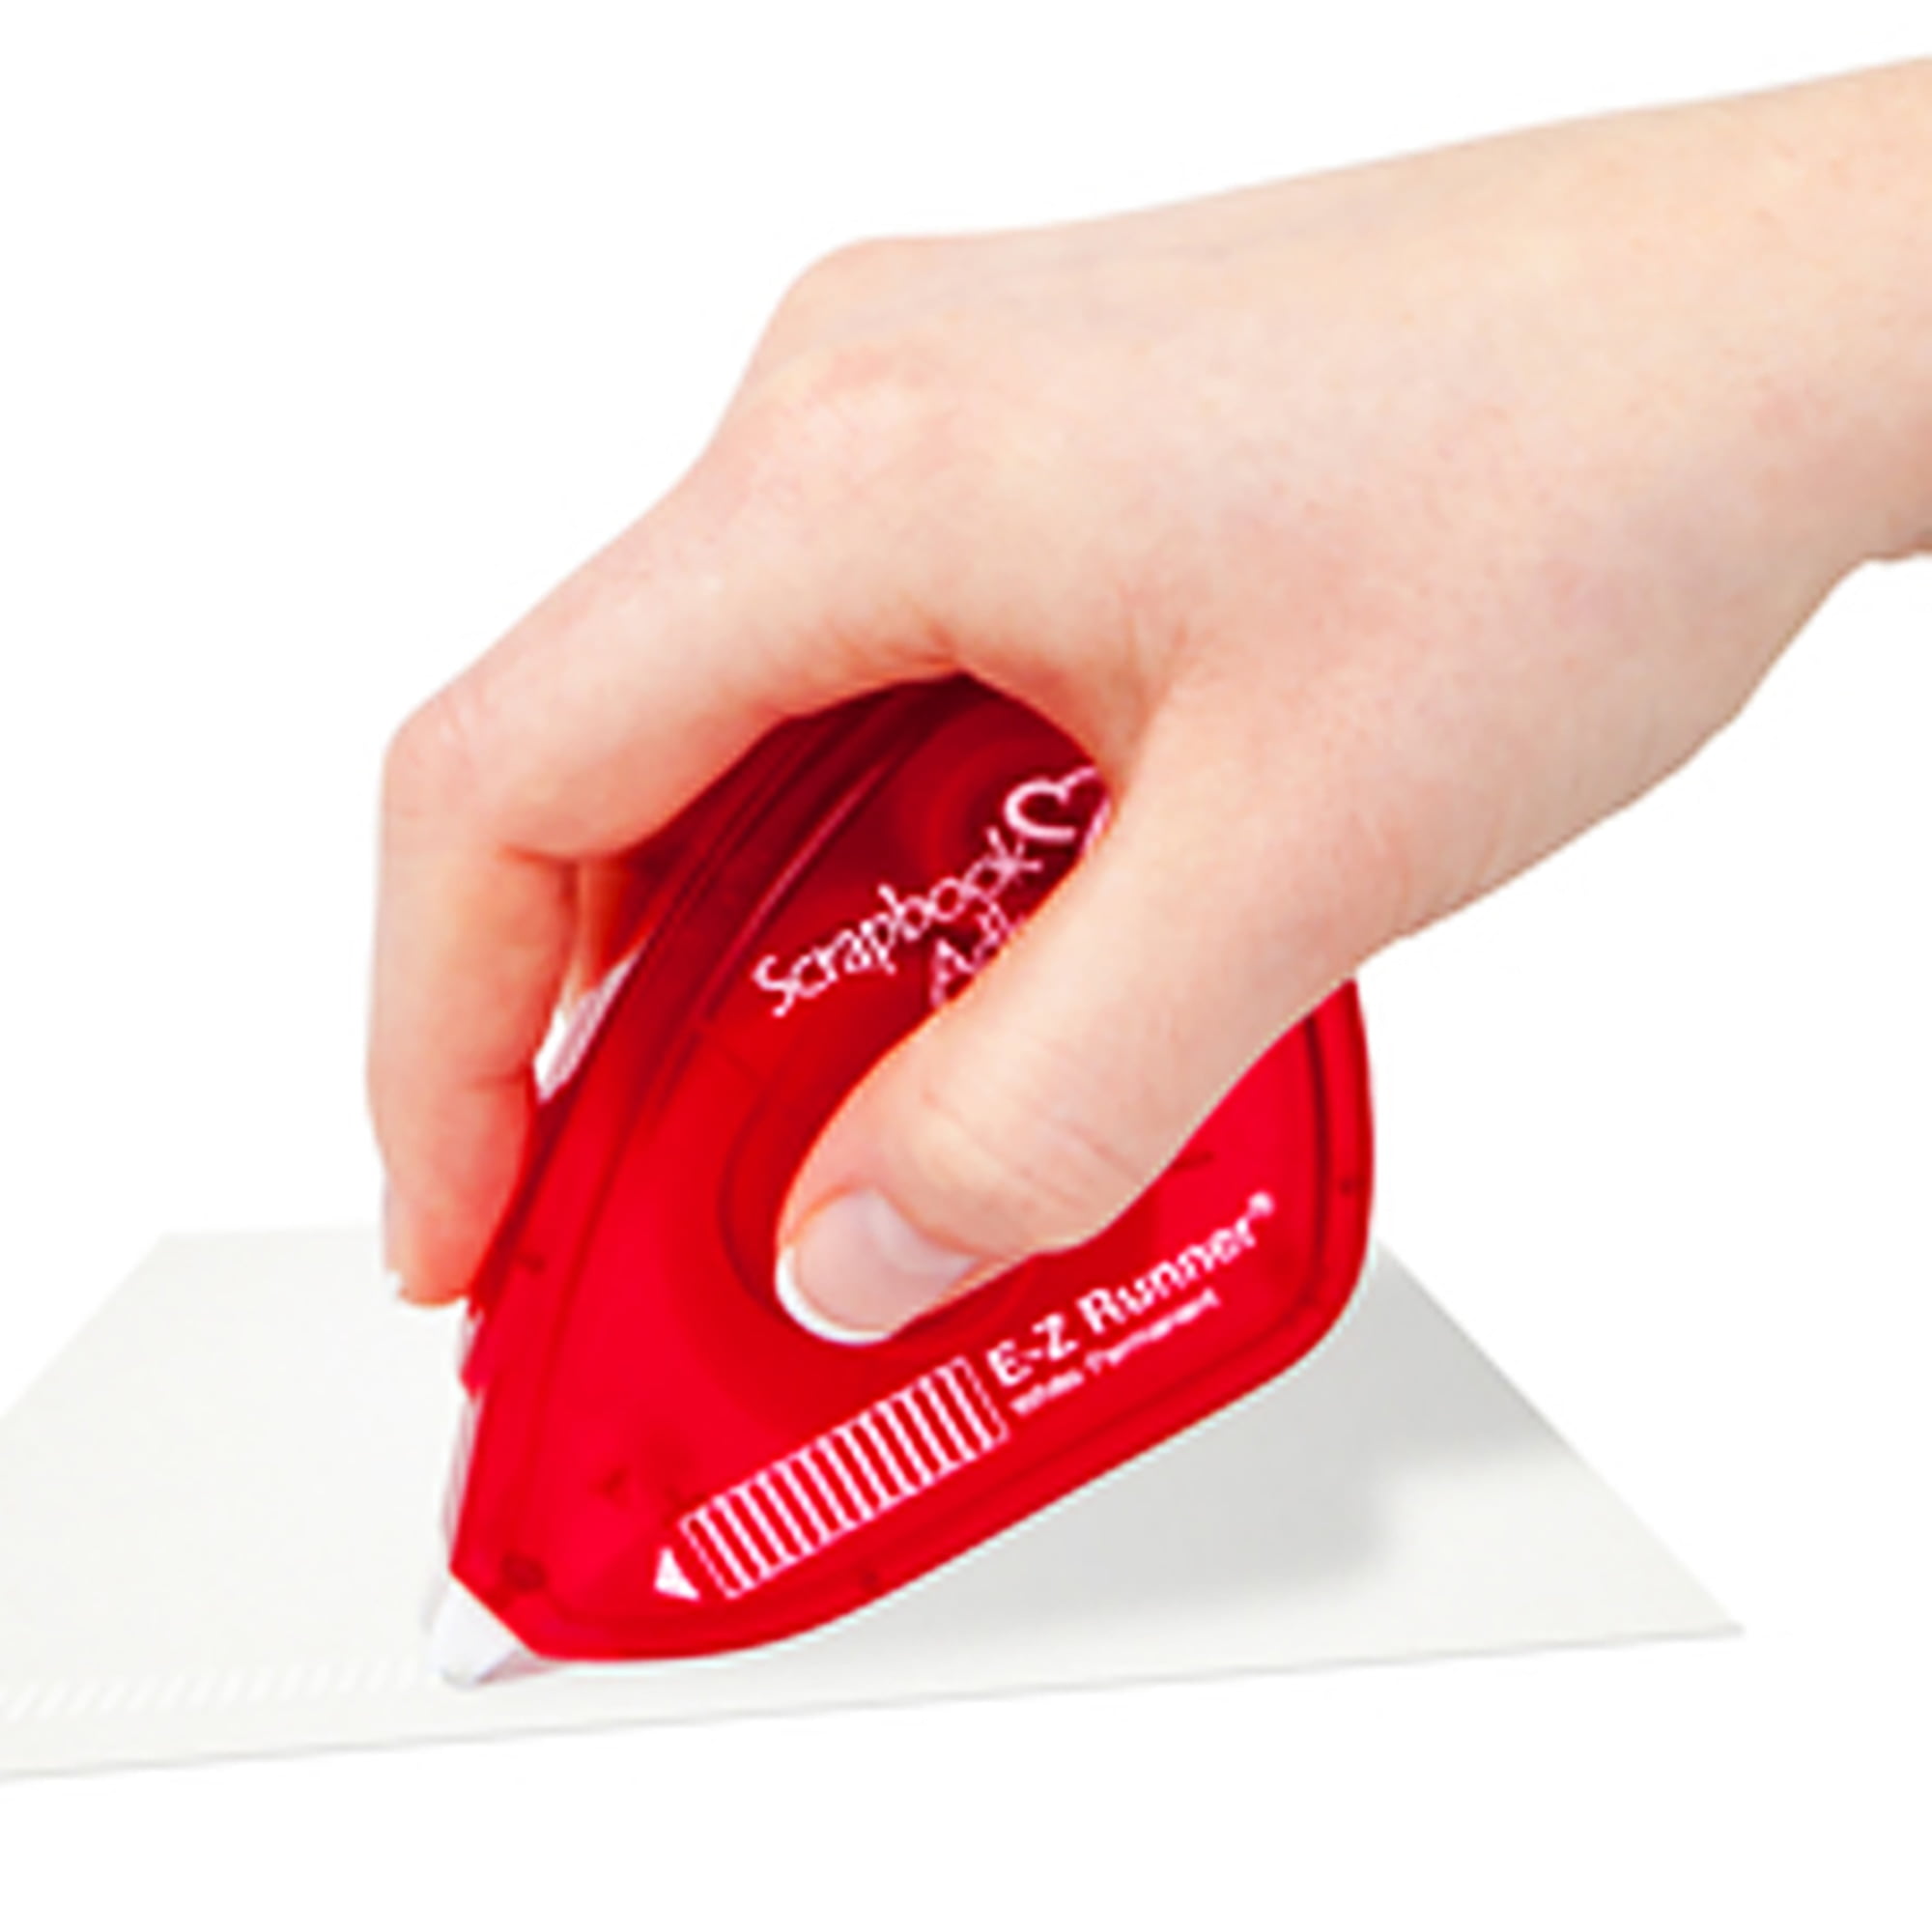 Scrapbook Adhesives by 3L® E-Z Runner® Permanent Tape Dispenser with 2  Refills